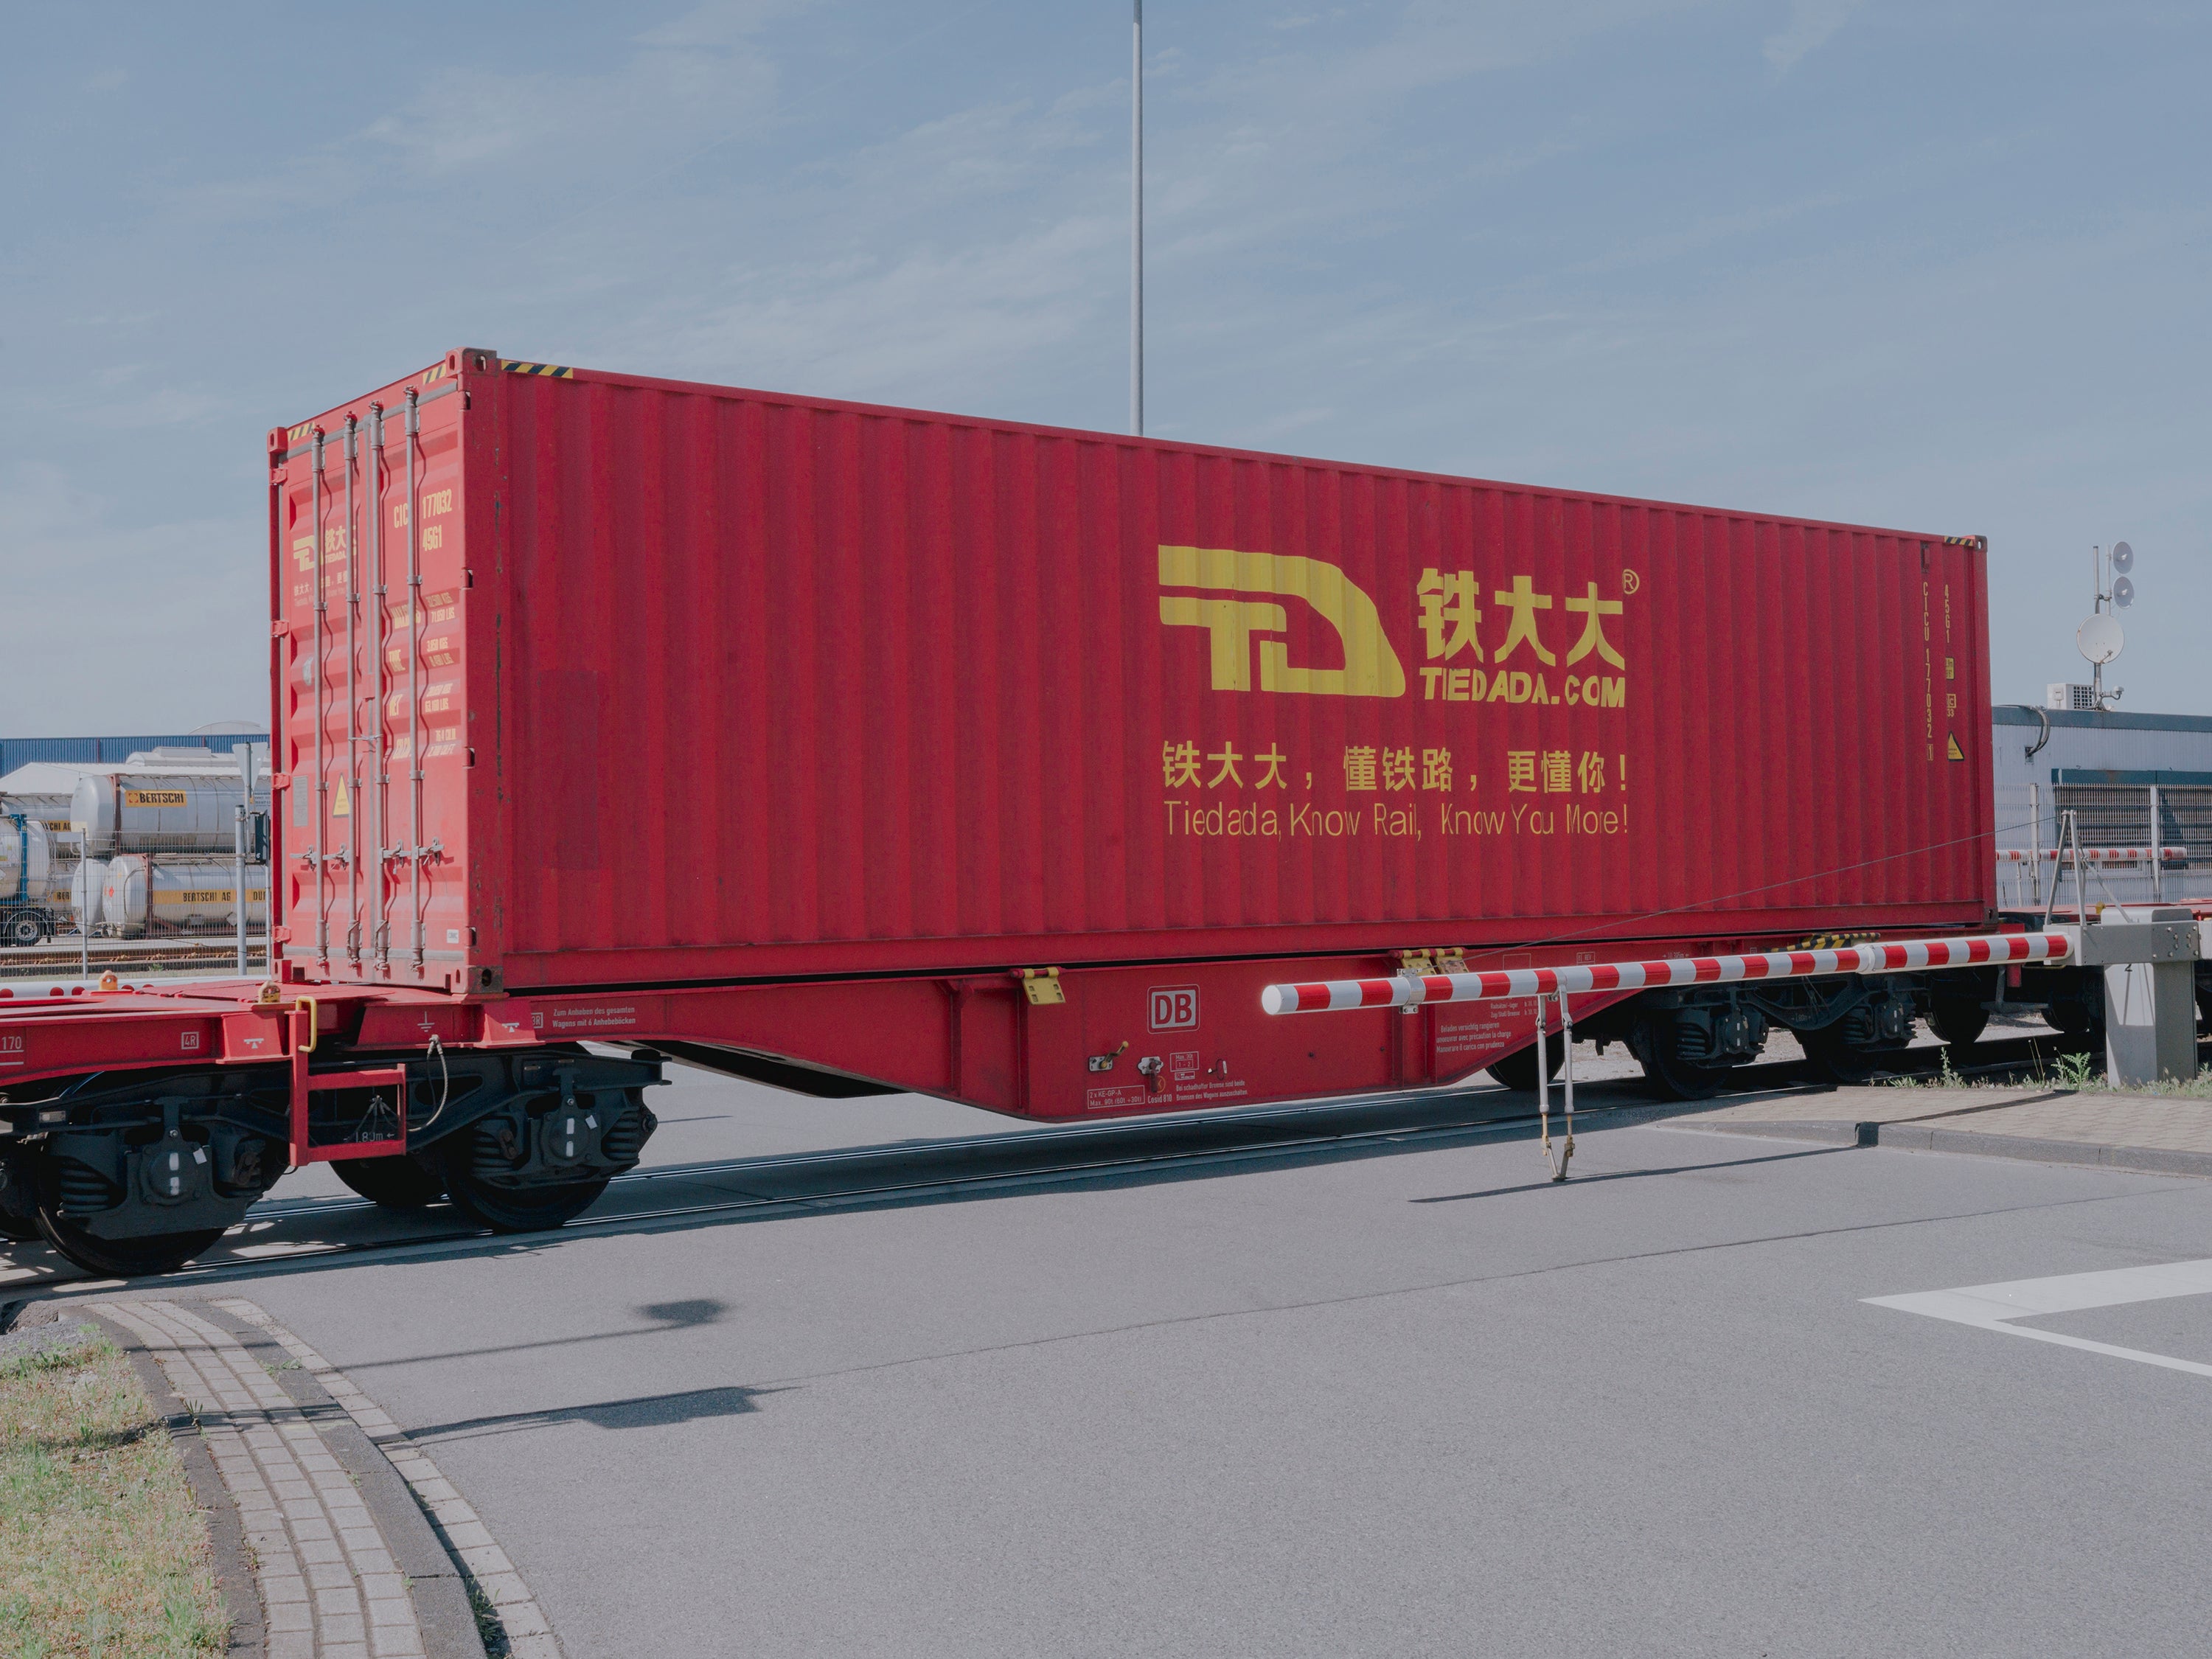 A container from China arrives at the port of Duisburg on 4 May